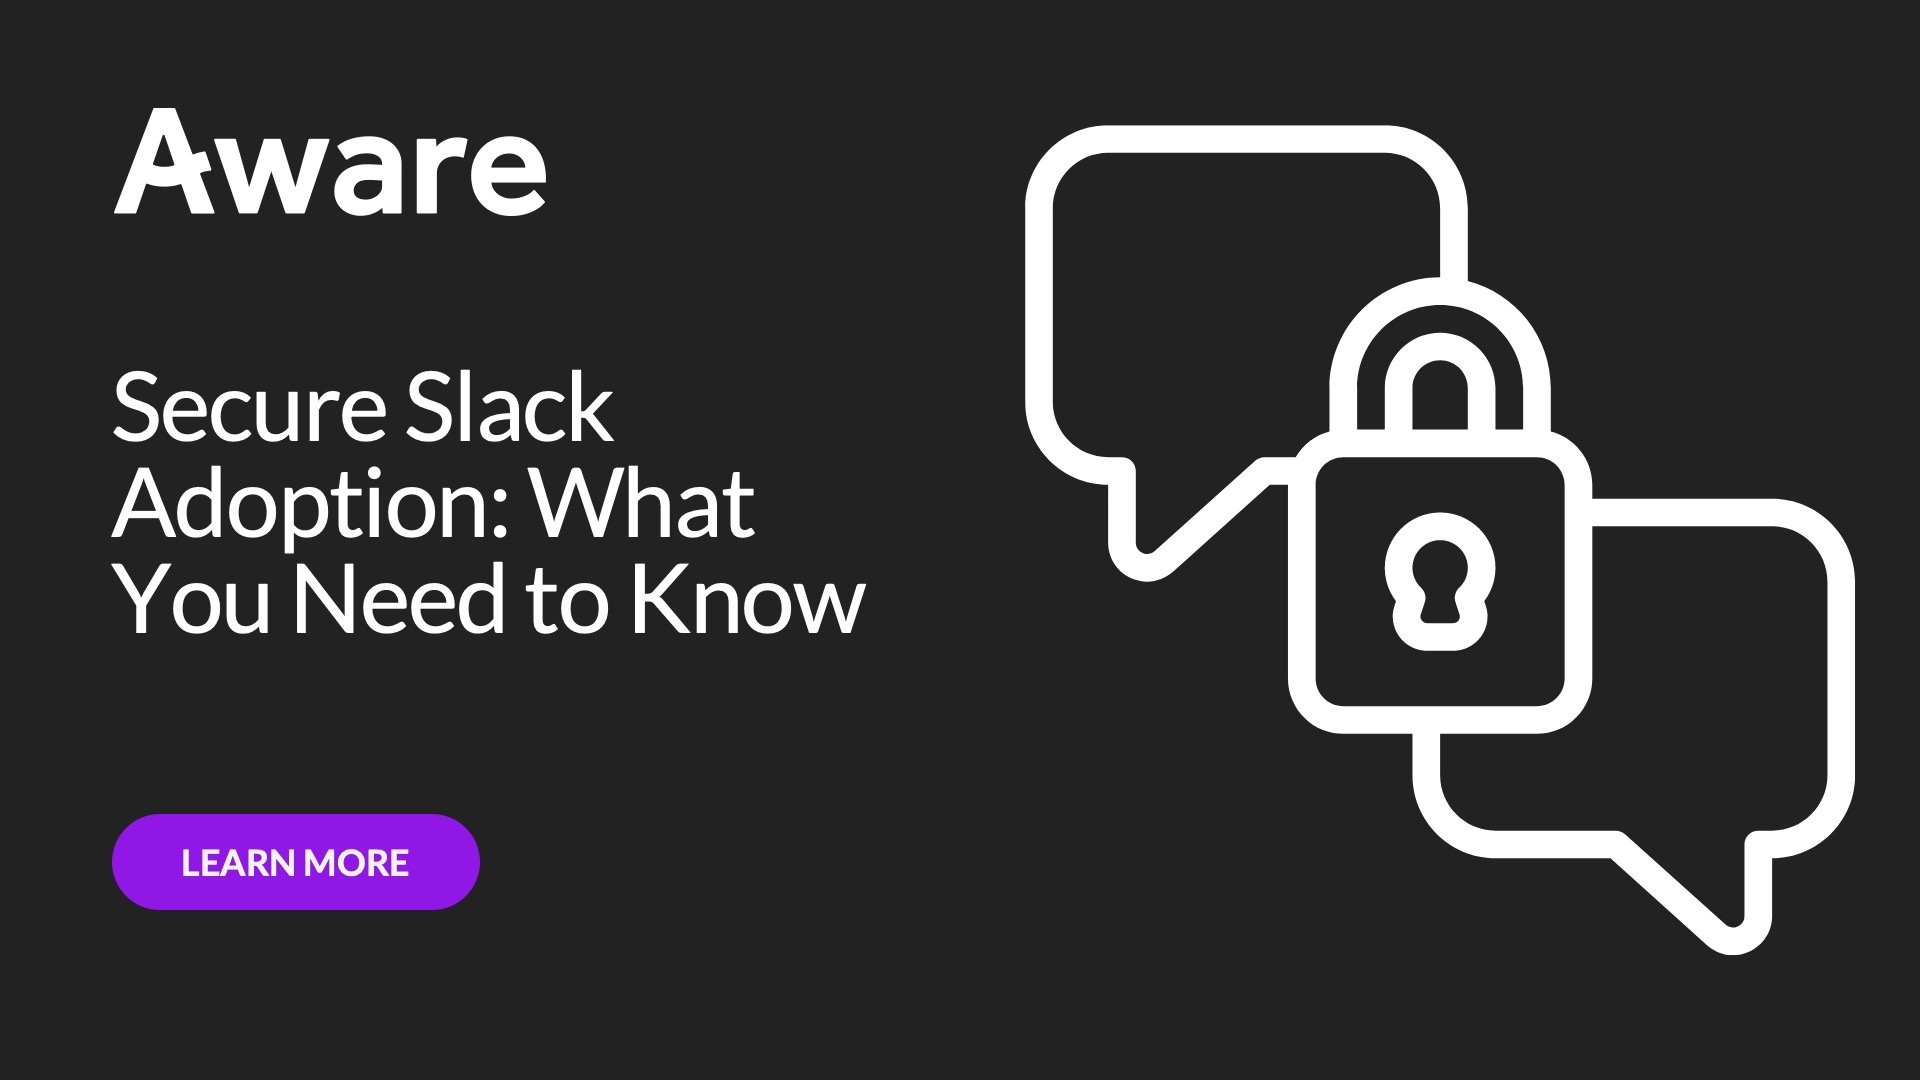 Secure Slack Adoption: What You Need to Know